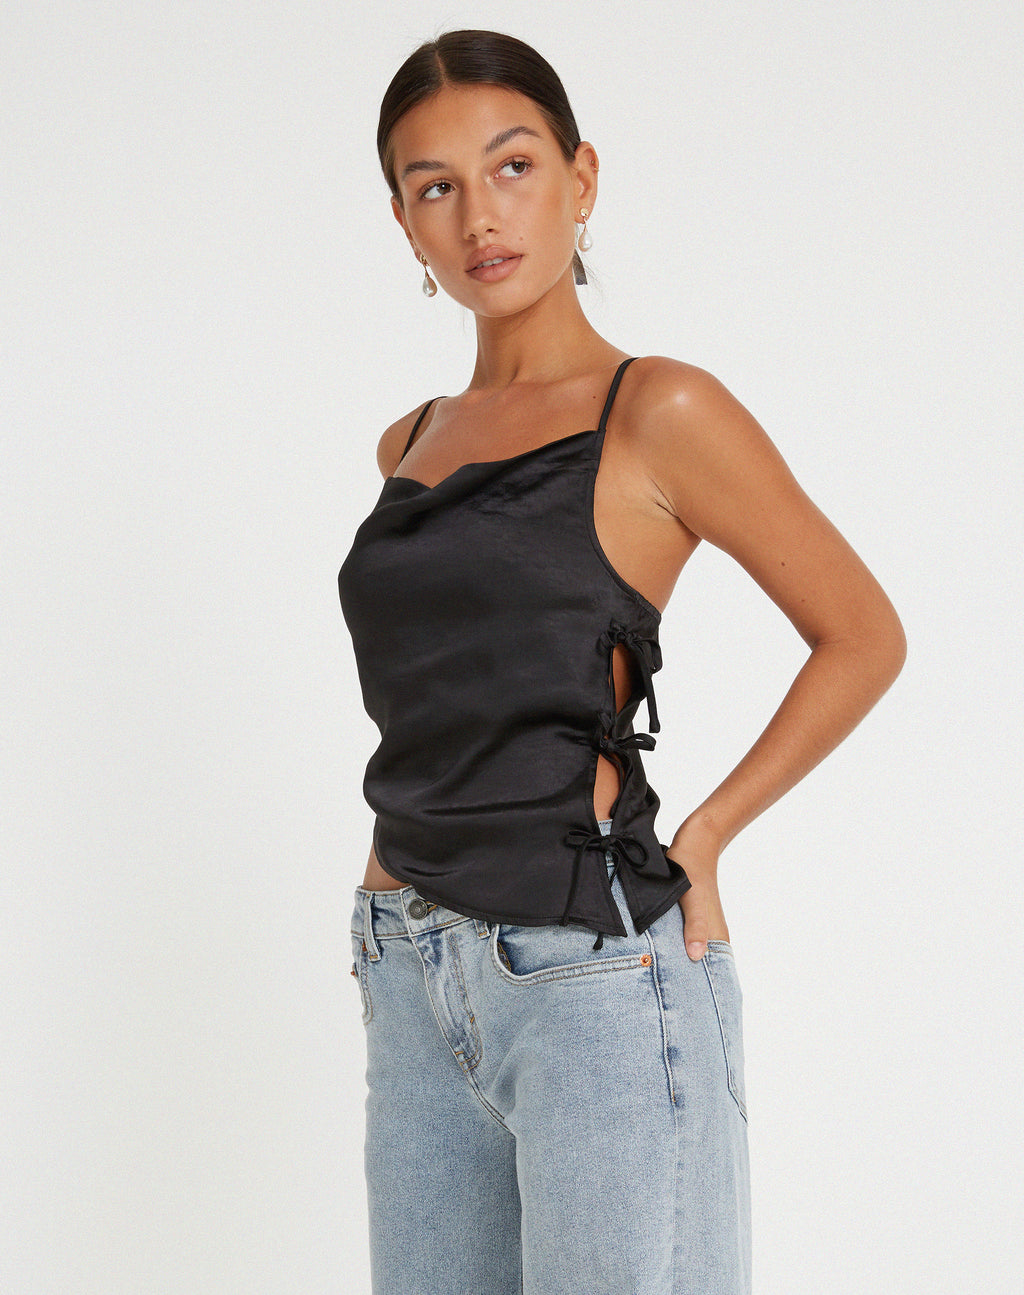 Timbis Strappy Top in Satin Black